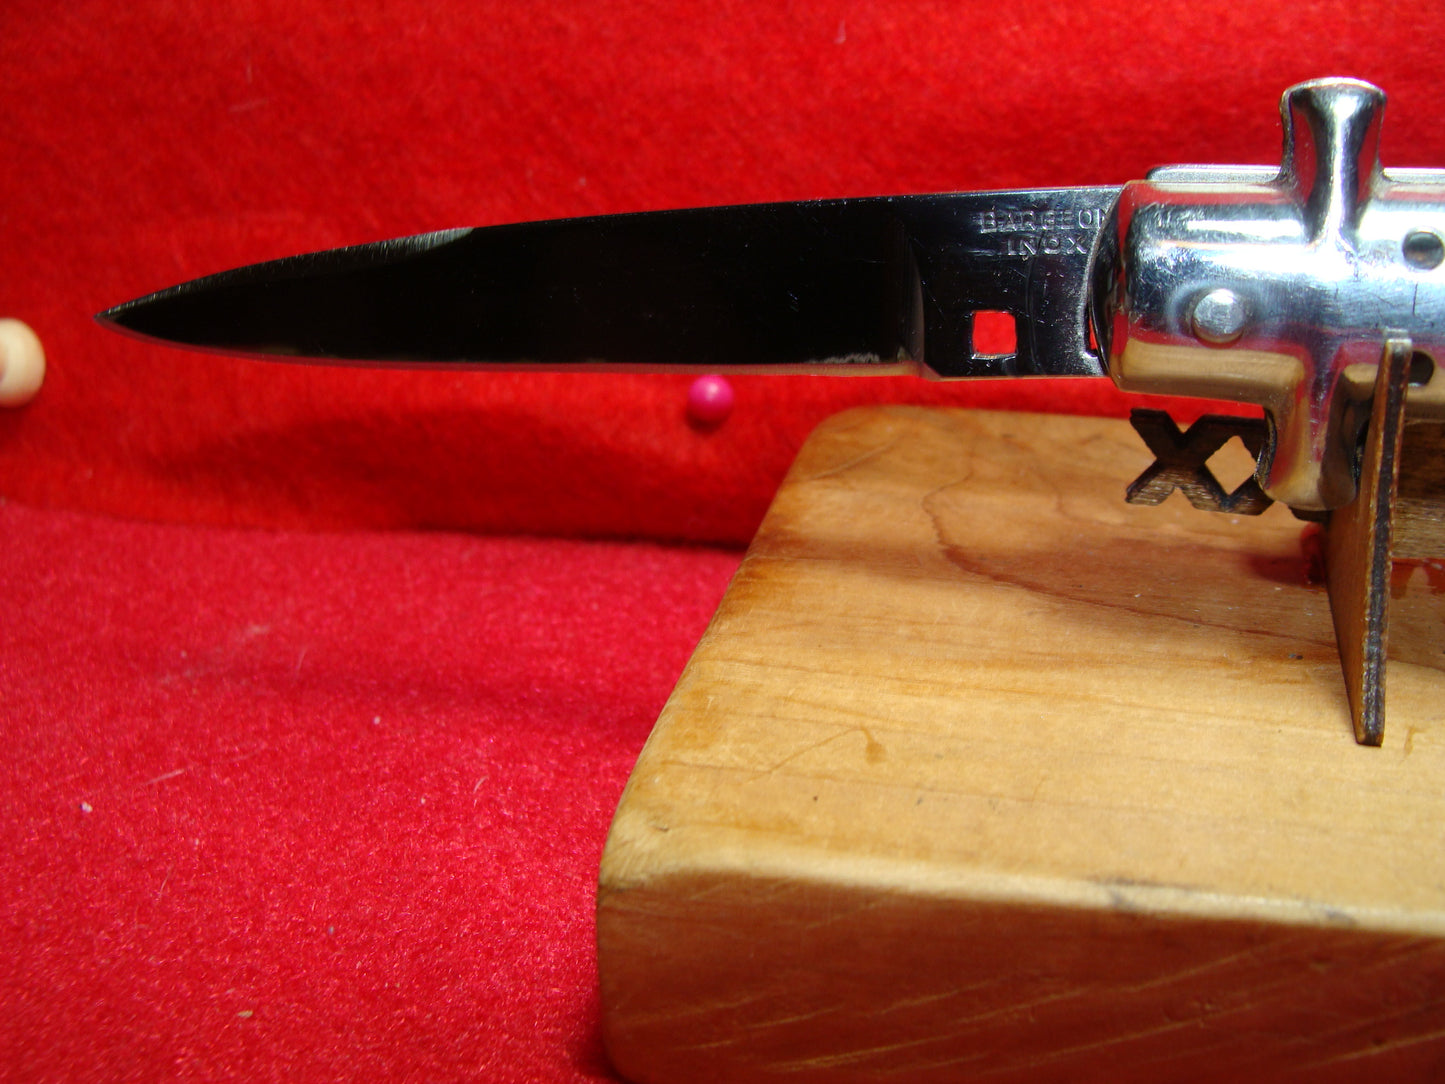 BARGEON INOX FRENCH 1960-68 FIXED GUARDS BO/BC FRENCH AUTOMATIC KNIFE BLACK CHECKERED PLASTIC HANDLES